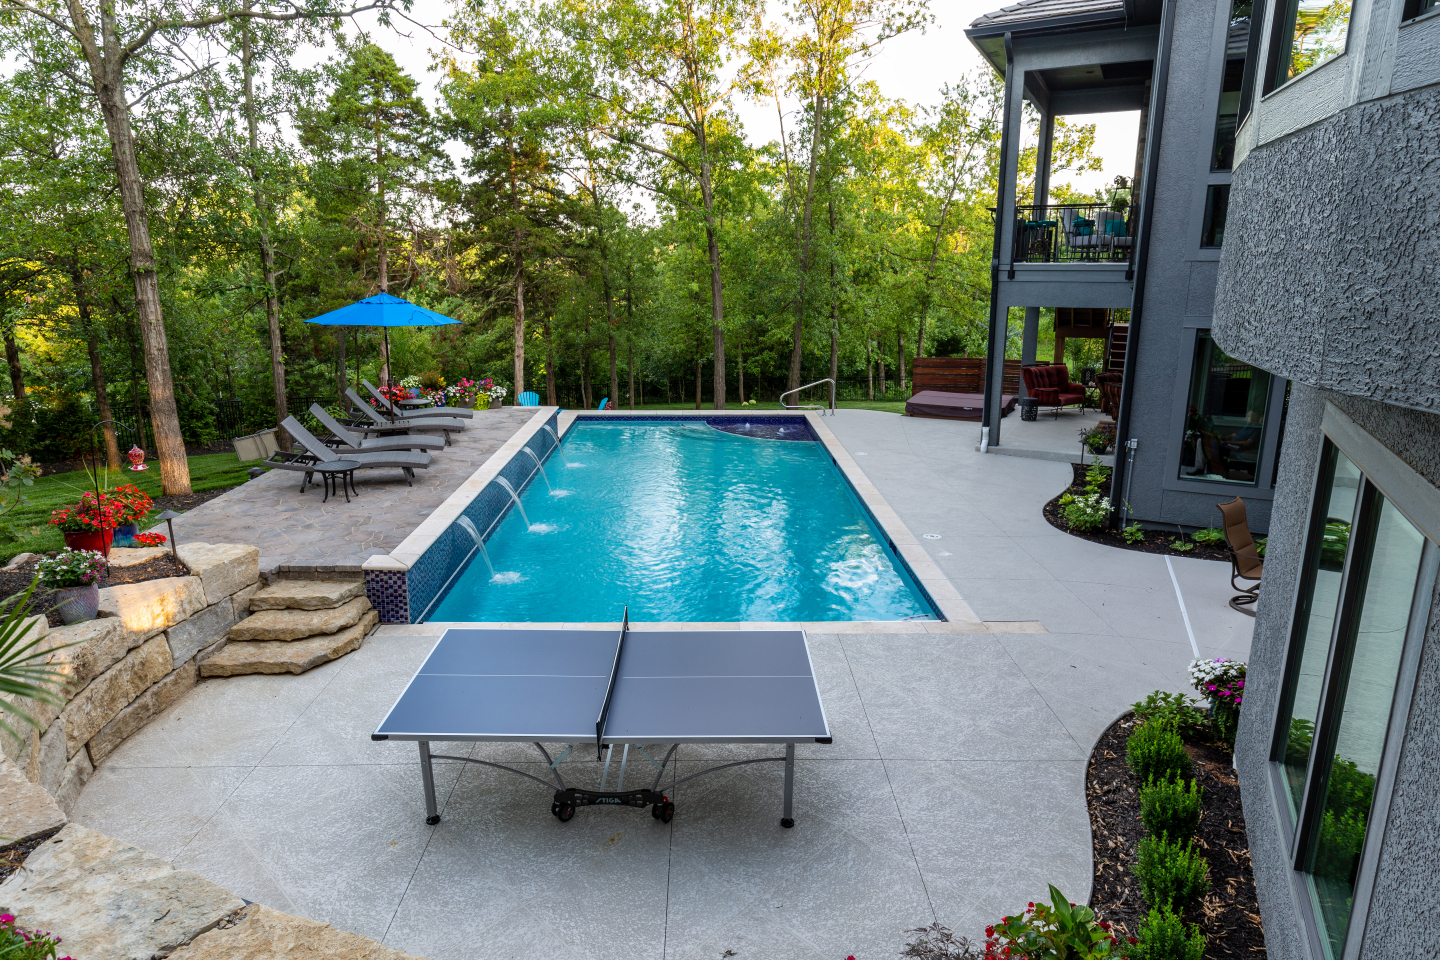 Outdoor pool with waterfalls and ping-pong table